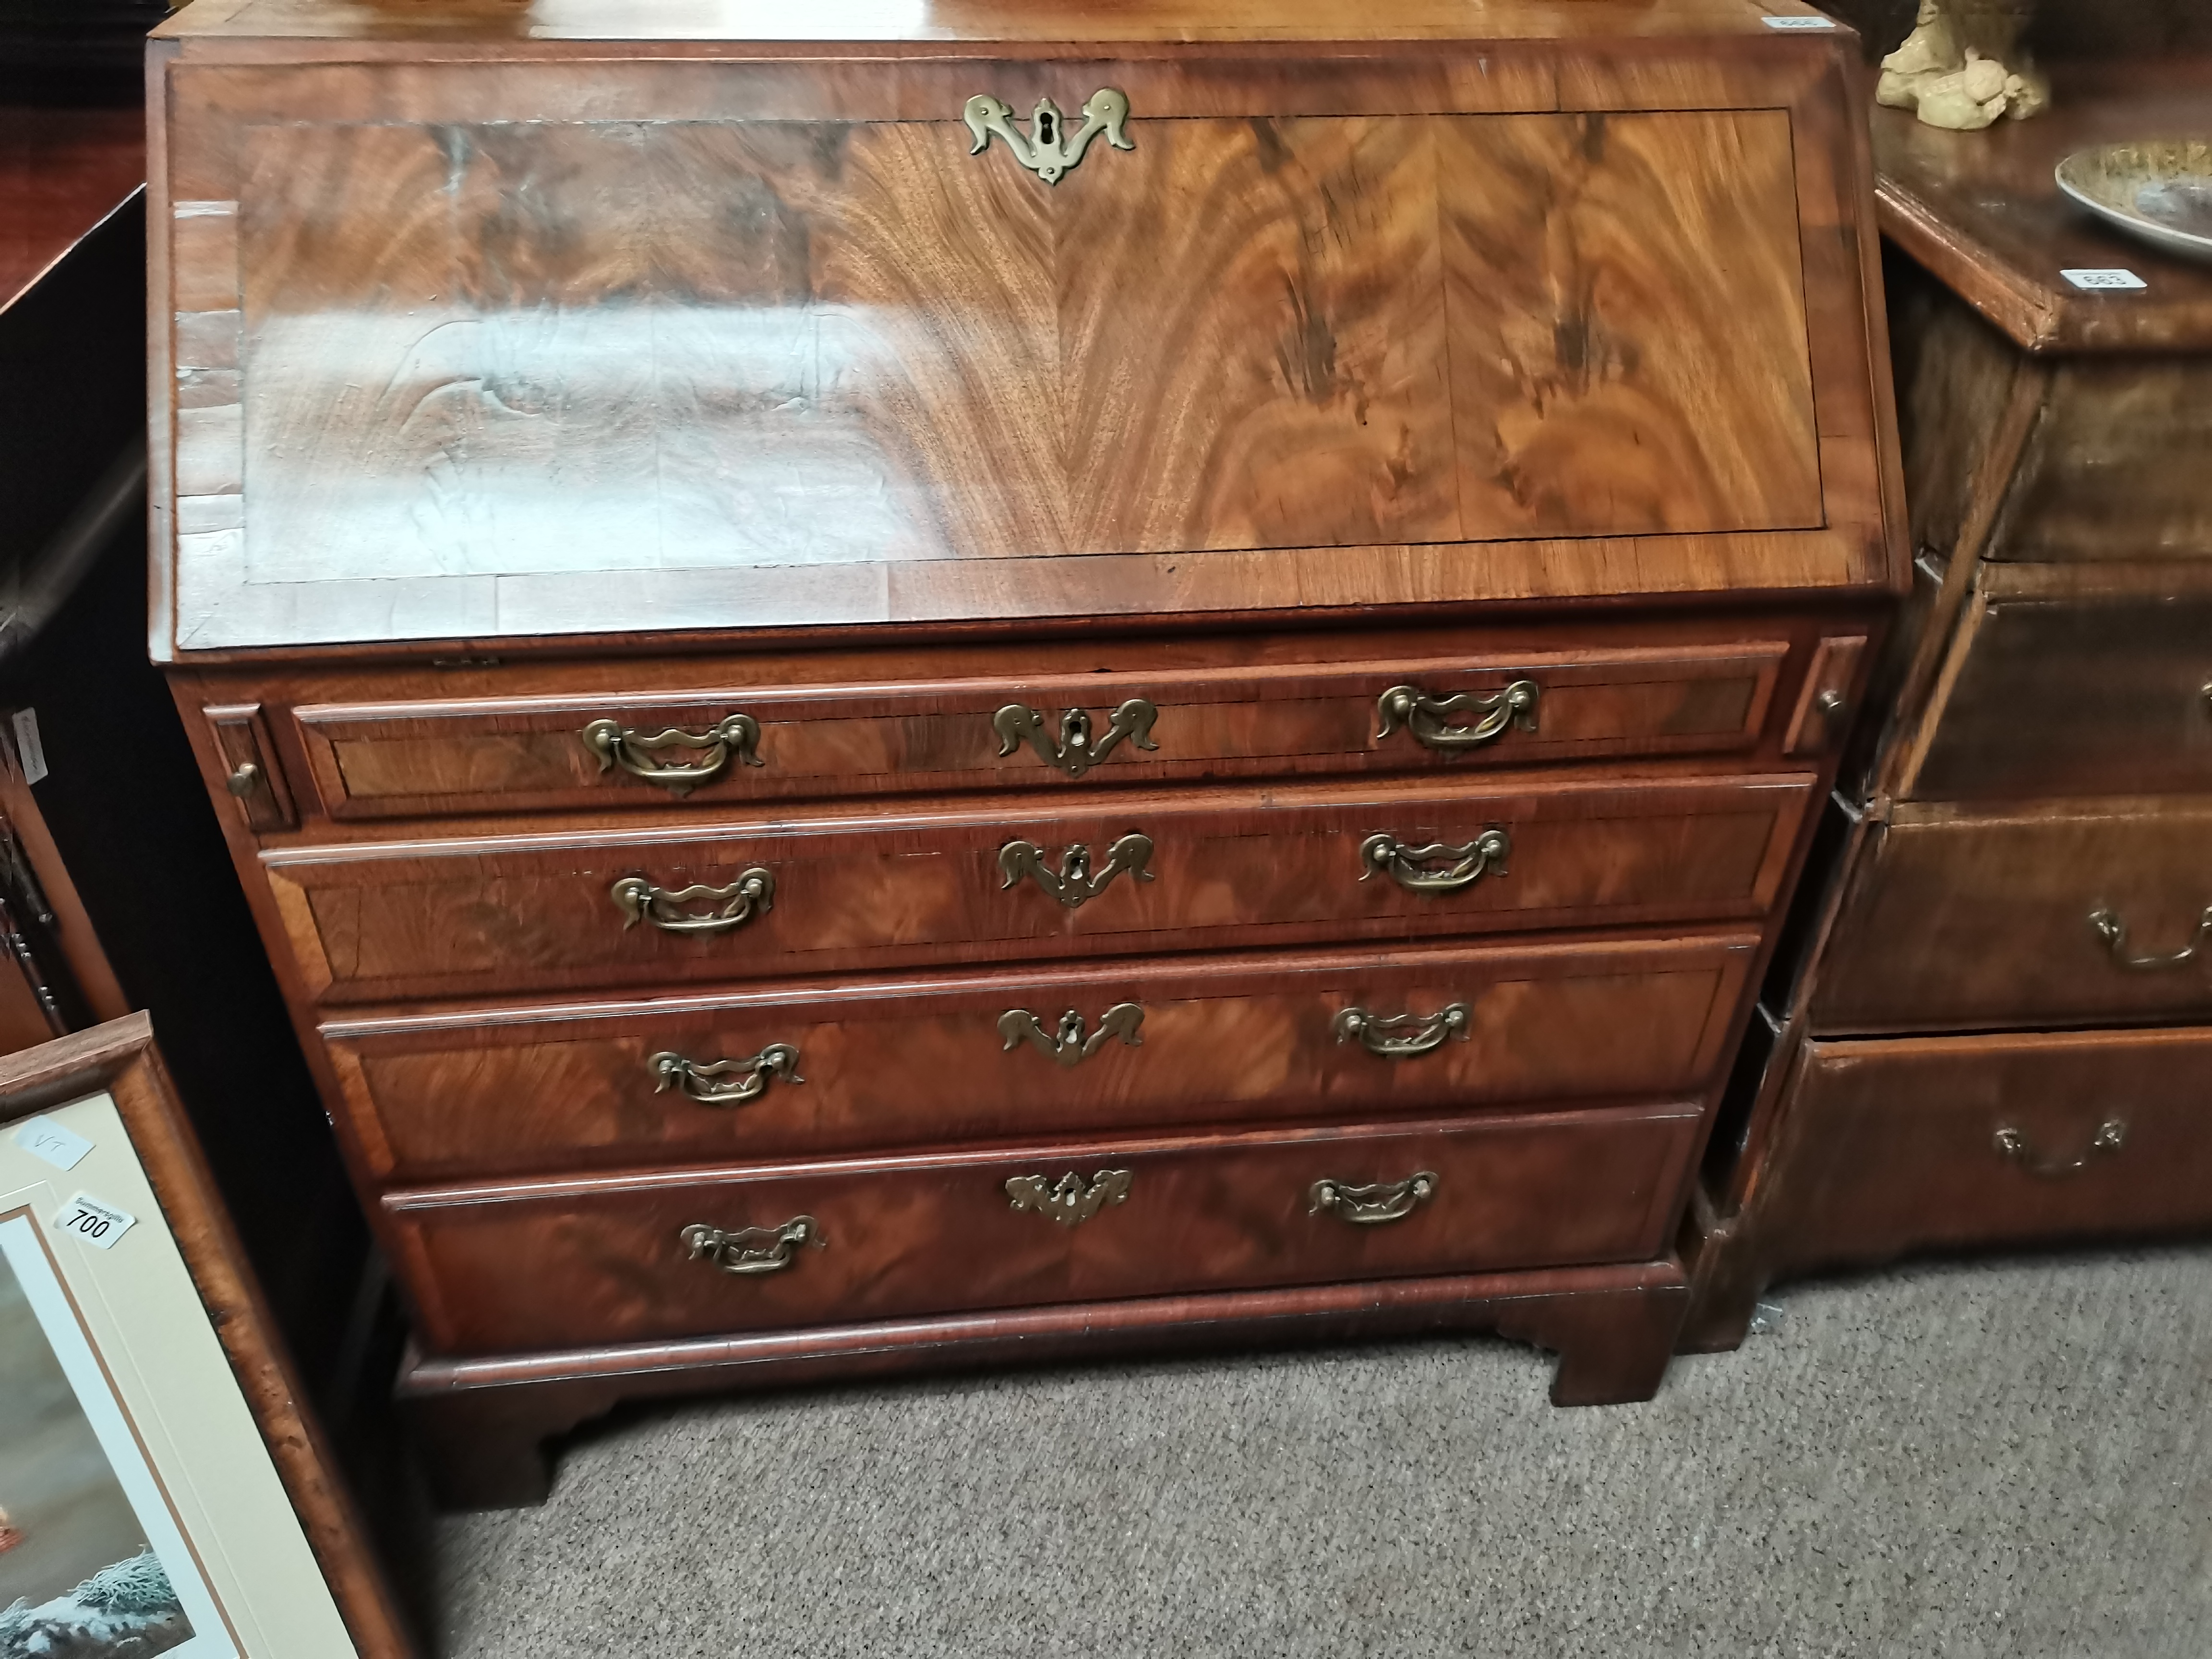 George I Mahogany Bureau - H105cm x W100cm - Good condition for age some signs of wear